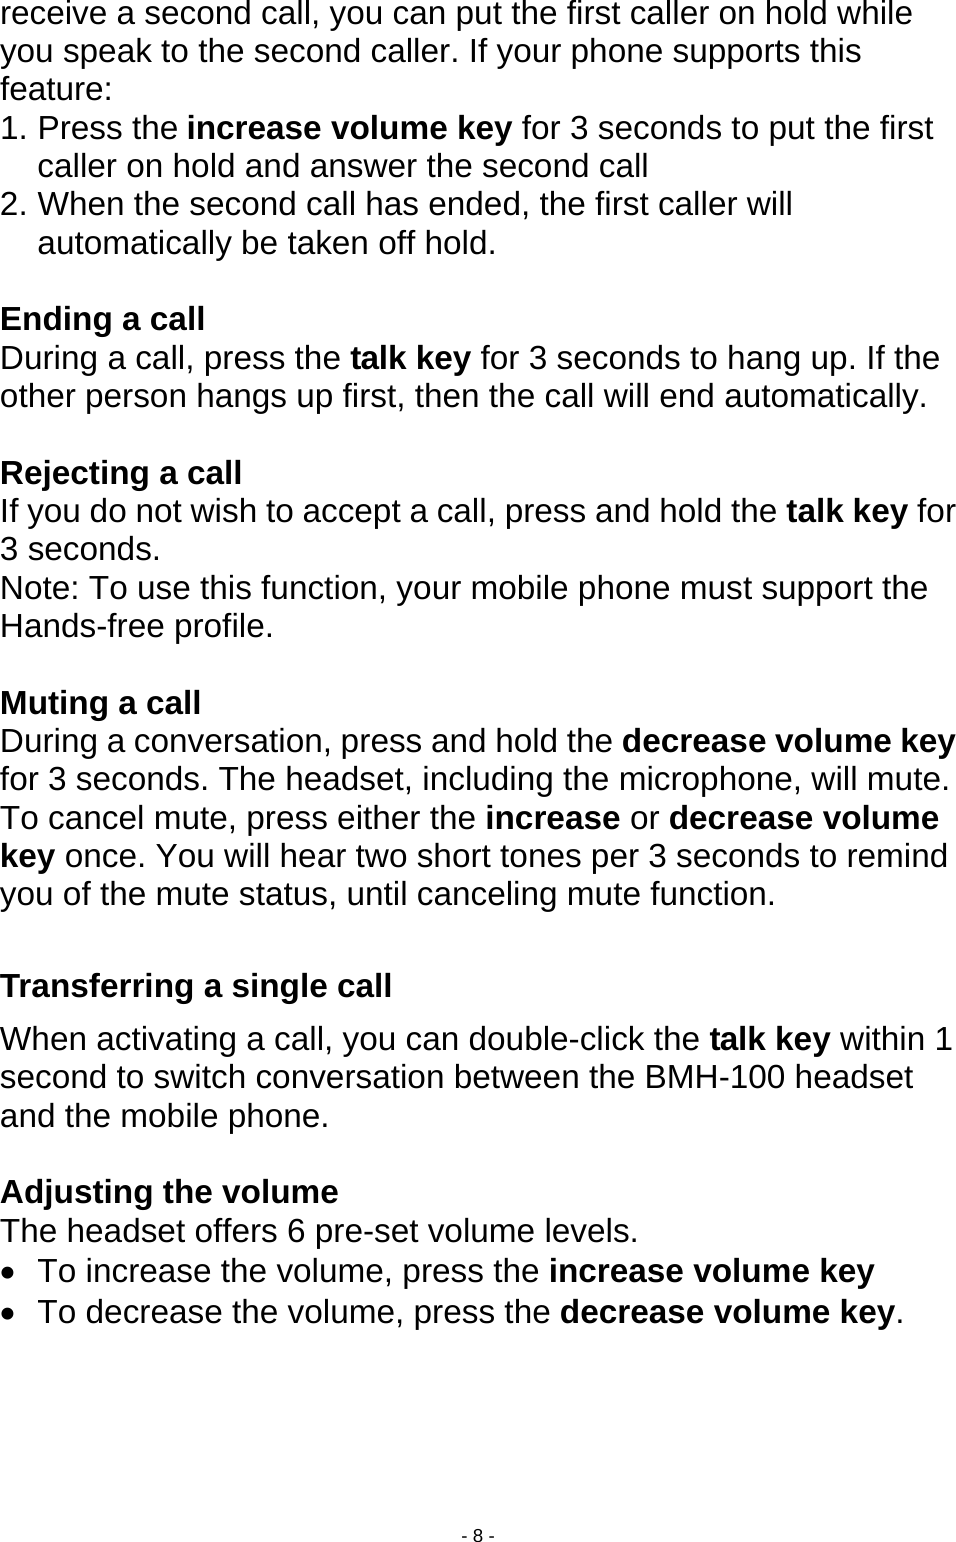  - 8 - receive a second call, you can put the first caller on hold while you speak to the second caller. If your phone supports this feature: 1. Press the increase volume key for 3 seconds to put the first caller on hold and answer the second call 2. When the second call has ended, the first caller will automatically be taken off hold.  Ending a call During a call, press the talk key for 3 seconds to hang up. If the other person hangs up first, then the call will end automatically.  Rejecting a call If you do not wish to accept a call, press and hold the talk key for 3 seconds.   Note: To use this function, your mobile phone must support the Hands-free profile.  Muting a call During a conversation, press and hold the decrease volume key for 3 seconds. The headset, including the microphone, will mute. To cancel mute, press either the increase or decrease volume key once. You will hear two short tones per 3 seconds to remind you of the mute status, until canceling mute function.  Transferring a single call     When activating a call, you can double-click the talk key within 1 second to switch conversation between the BMH-100 headset and the mobile phone.  Adjusting the volume The headset offers 6 pre-set volume levels.   •  To increase the volume, press the increase volume key •  To decrease the volume, press the decrease volume key.  